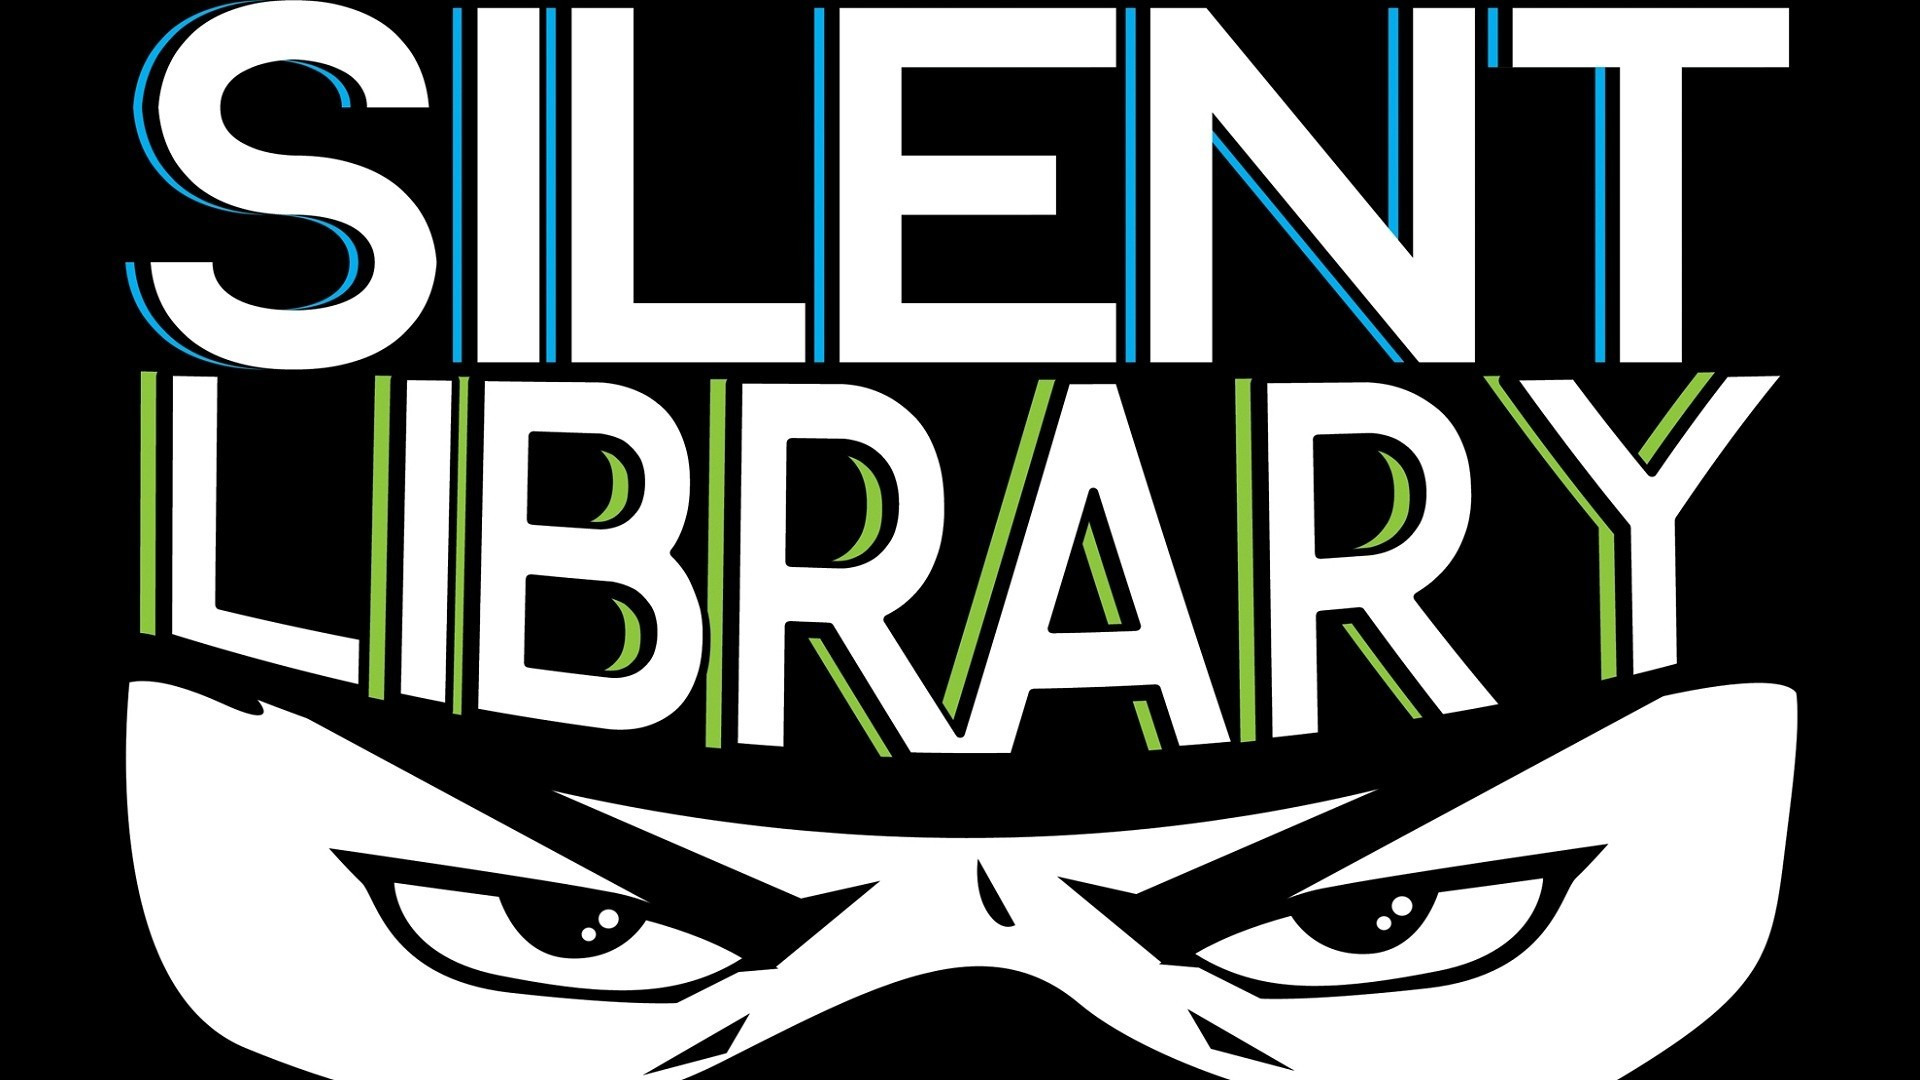 Show Silent Library